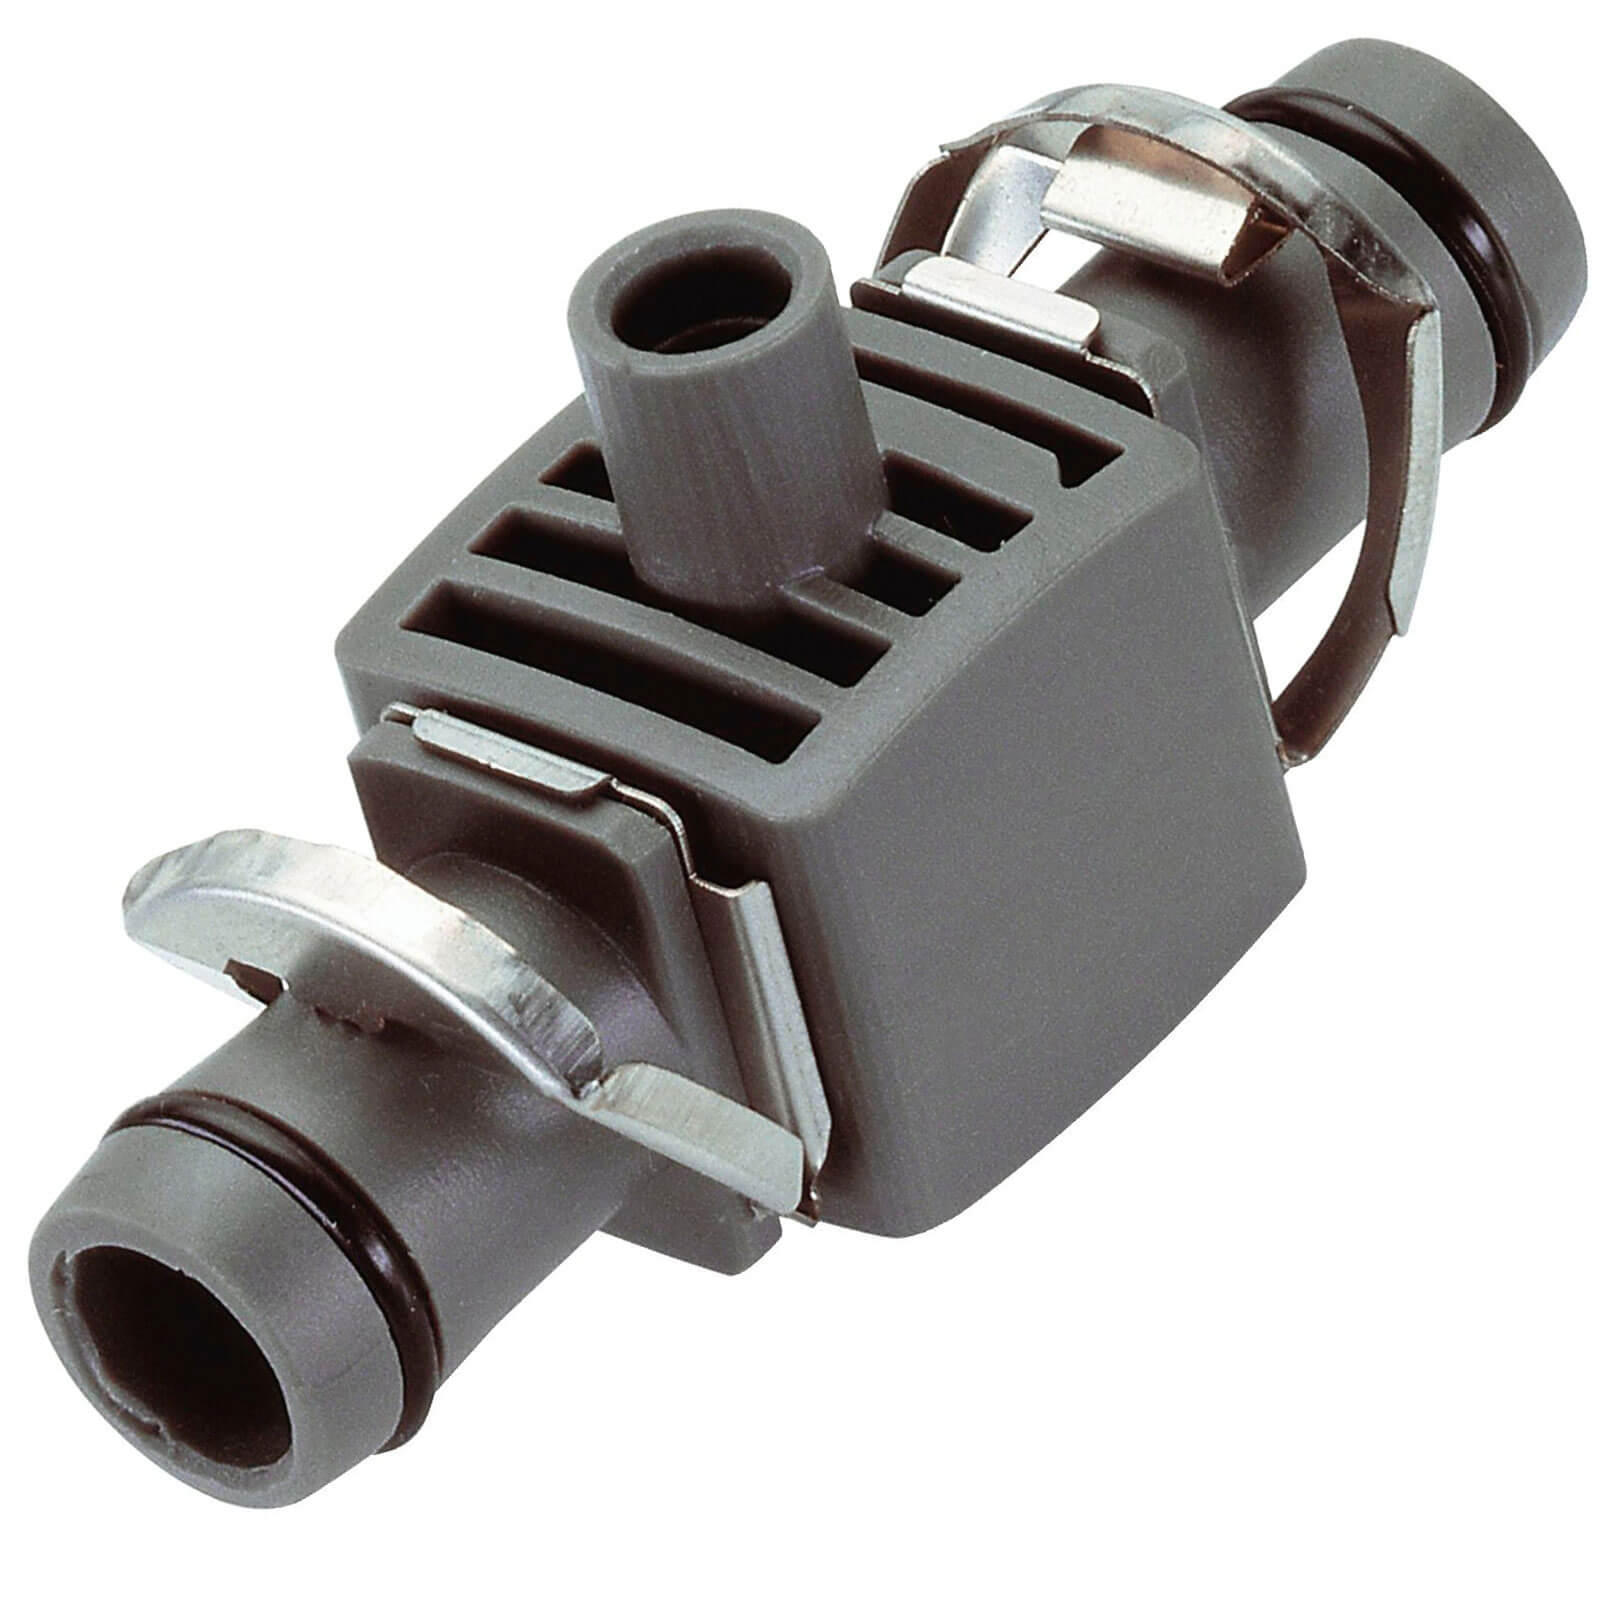 Photo of Gardena Micro Drip T Joint Connector For Spray Nozzle 1/2